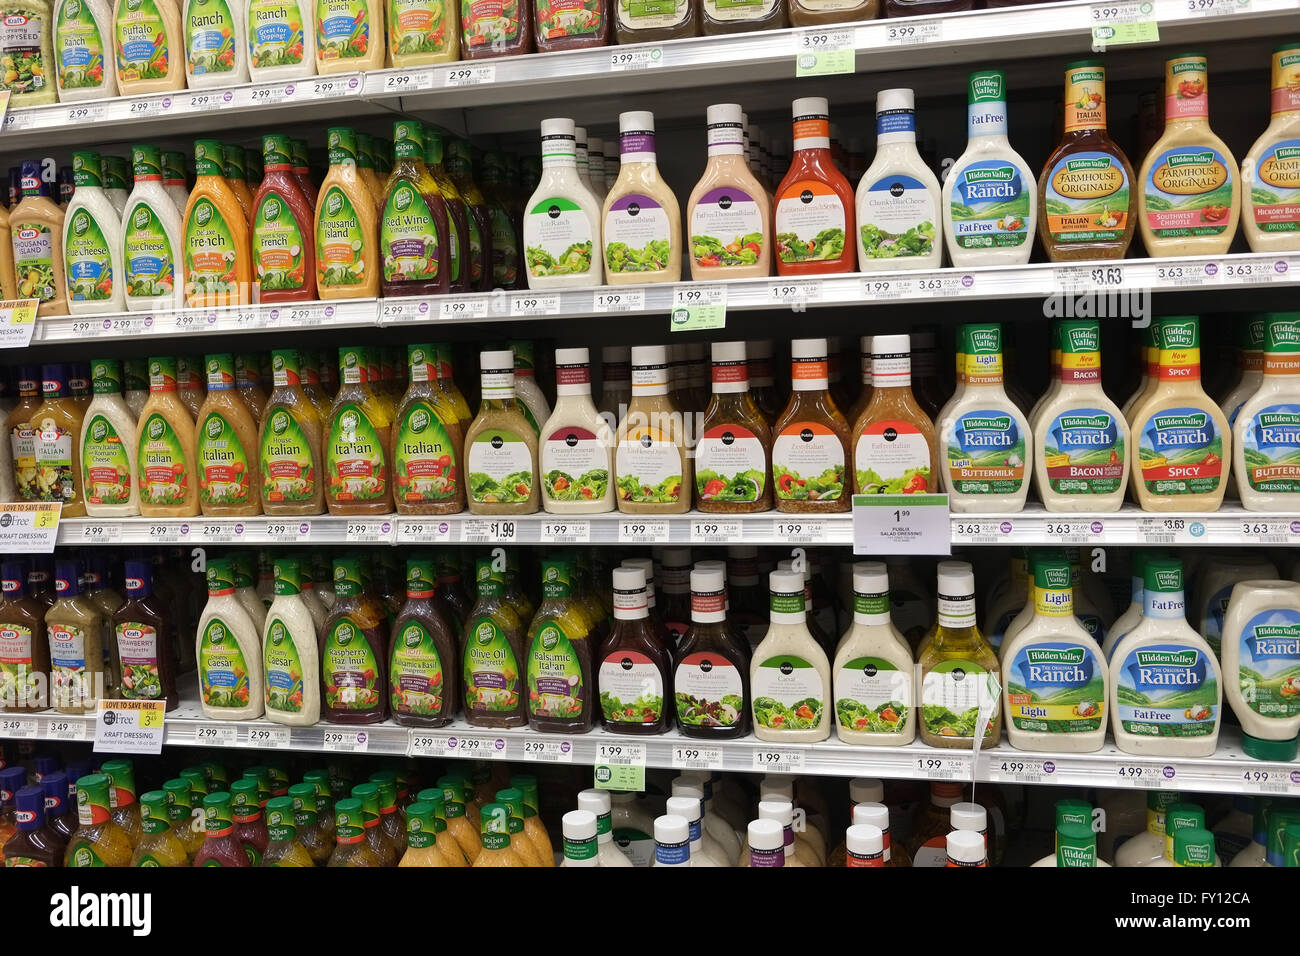 Well stocked shelves of sauces and mayonnaise in a supermarket in Florida, April 2016 Stock Photo